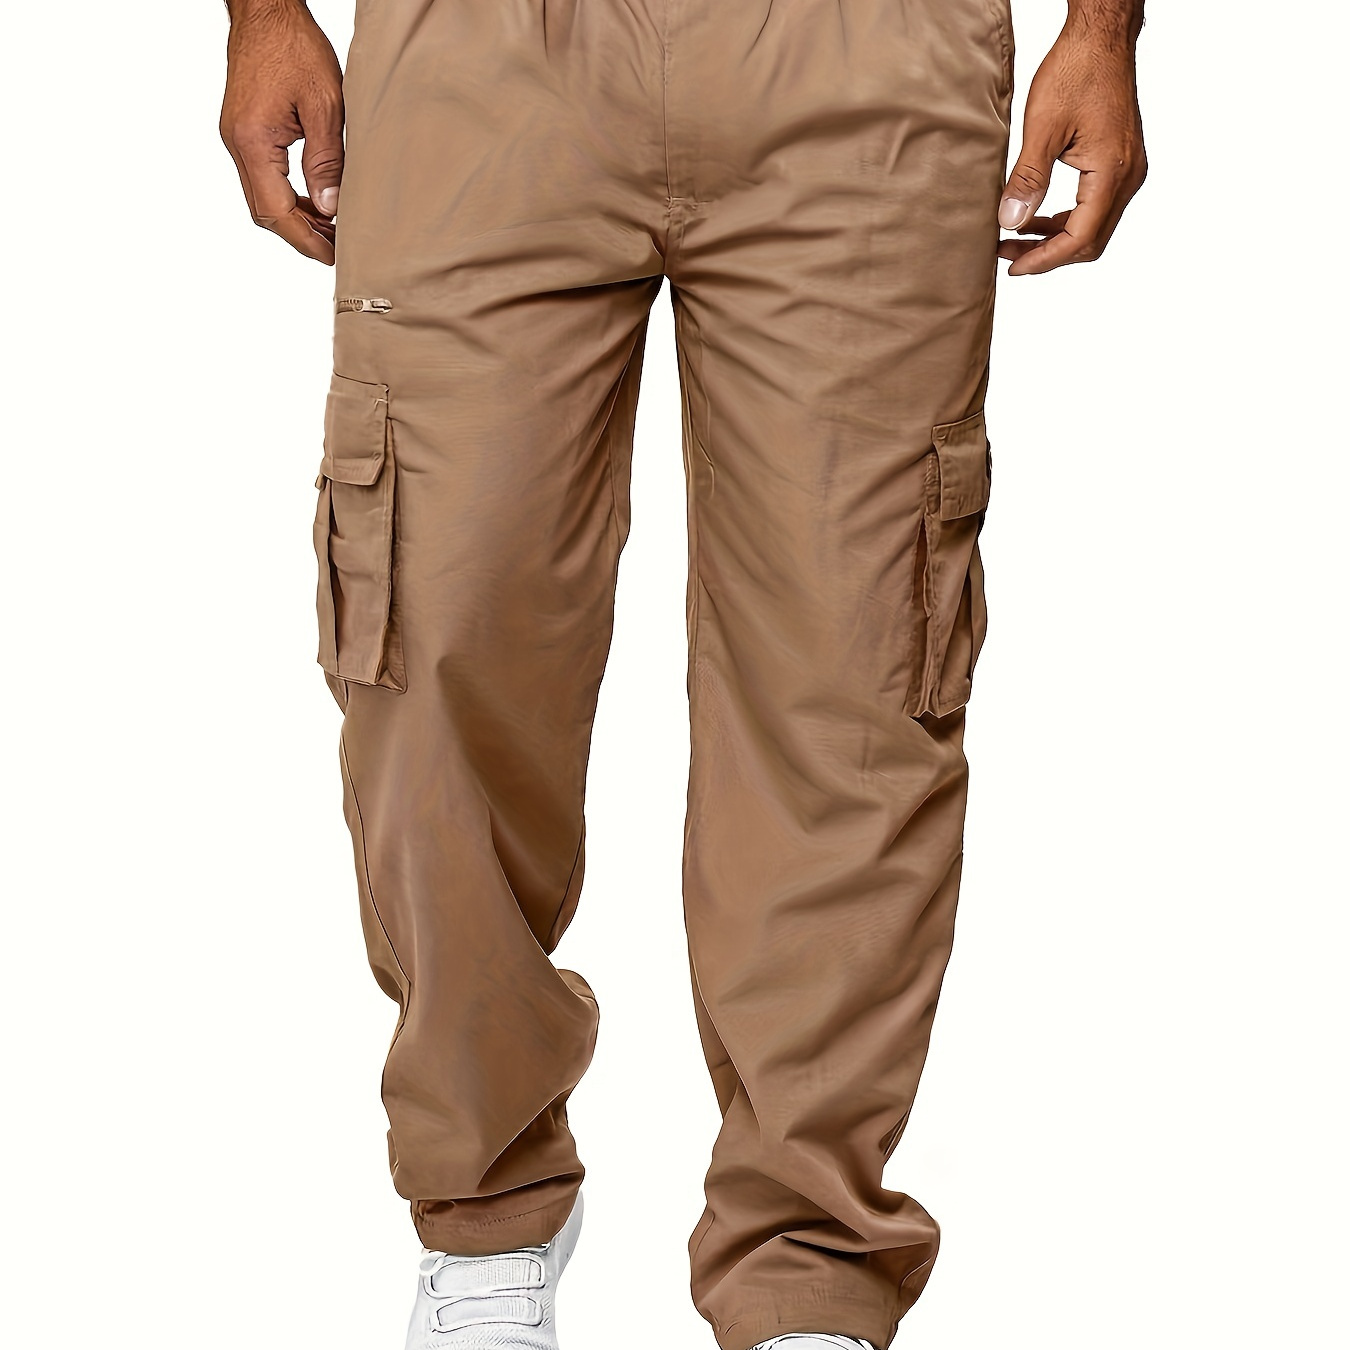 

Plus Size Men's Thin Cargo Pants With Side Pockets For Spring And Suumer, Oversized Loose Clothing For Big And Tall Guys, Best Sellers Gifts